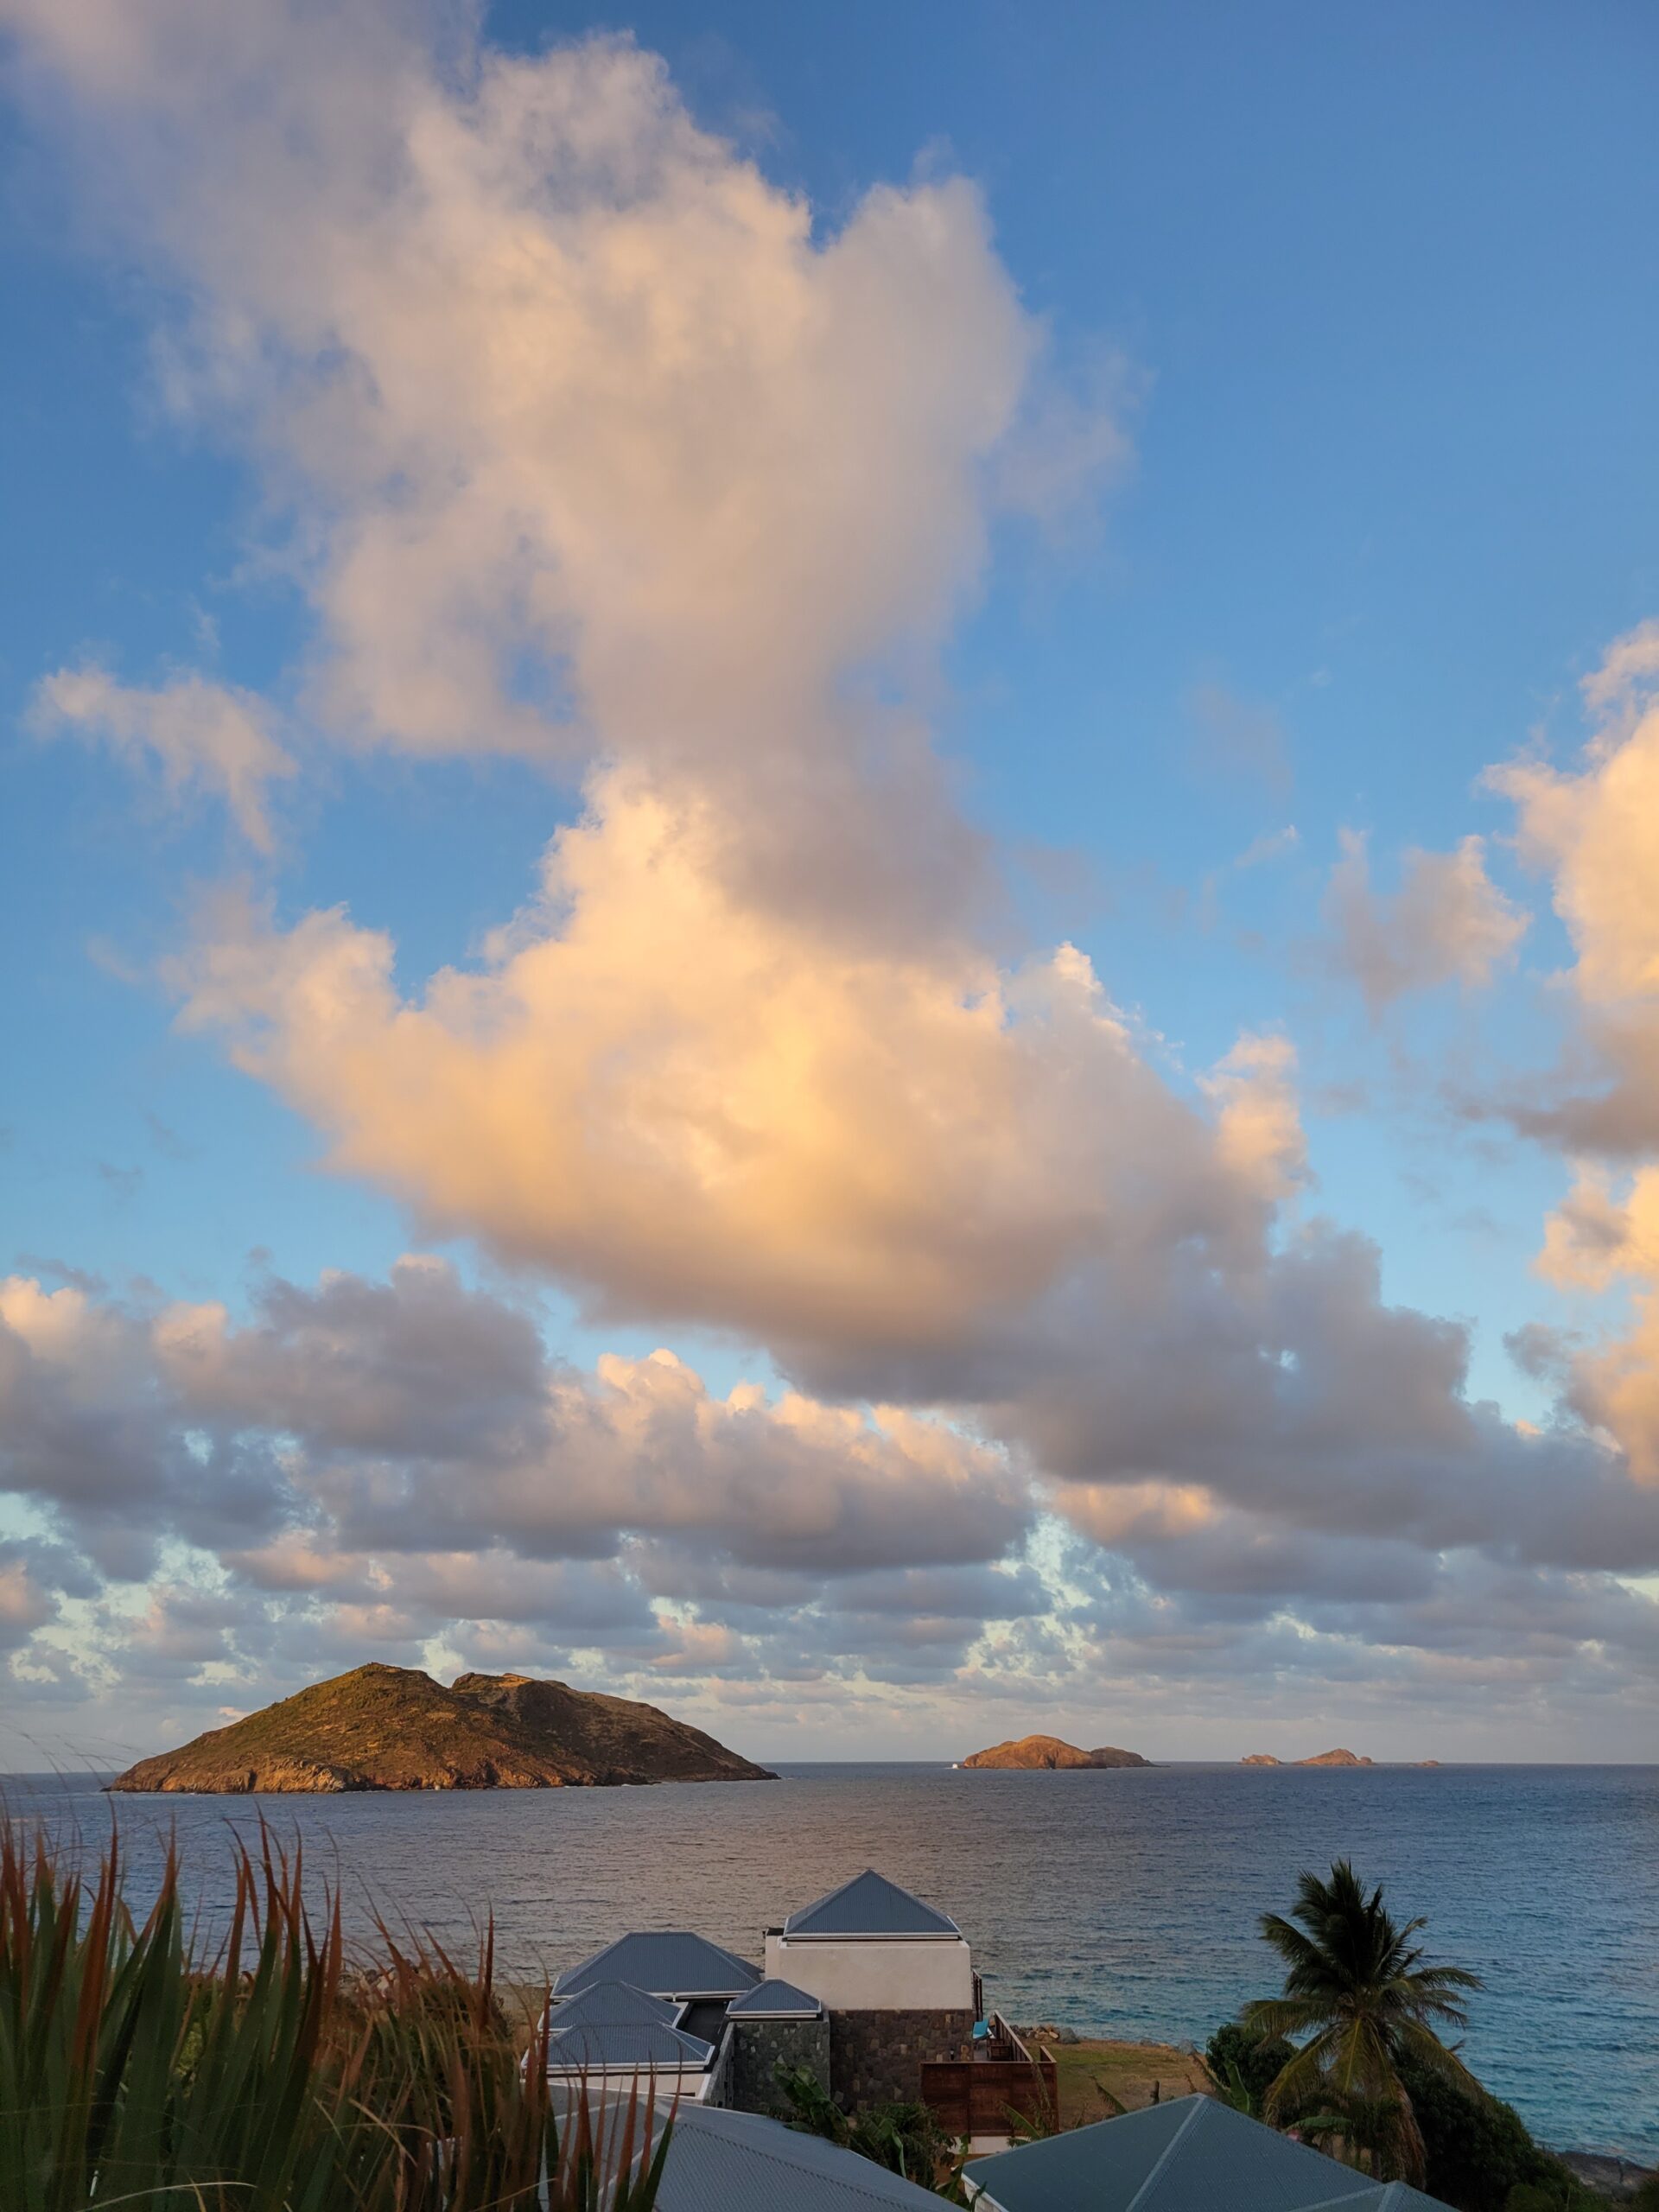 J'accuse? St. Barth reacts to "Clouds on the Horizon"